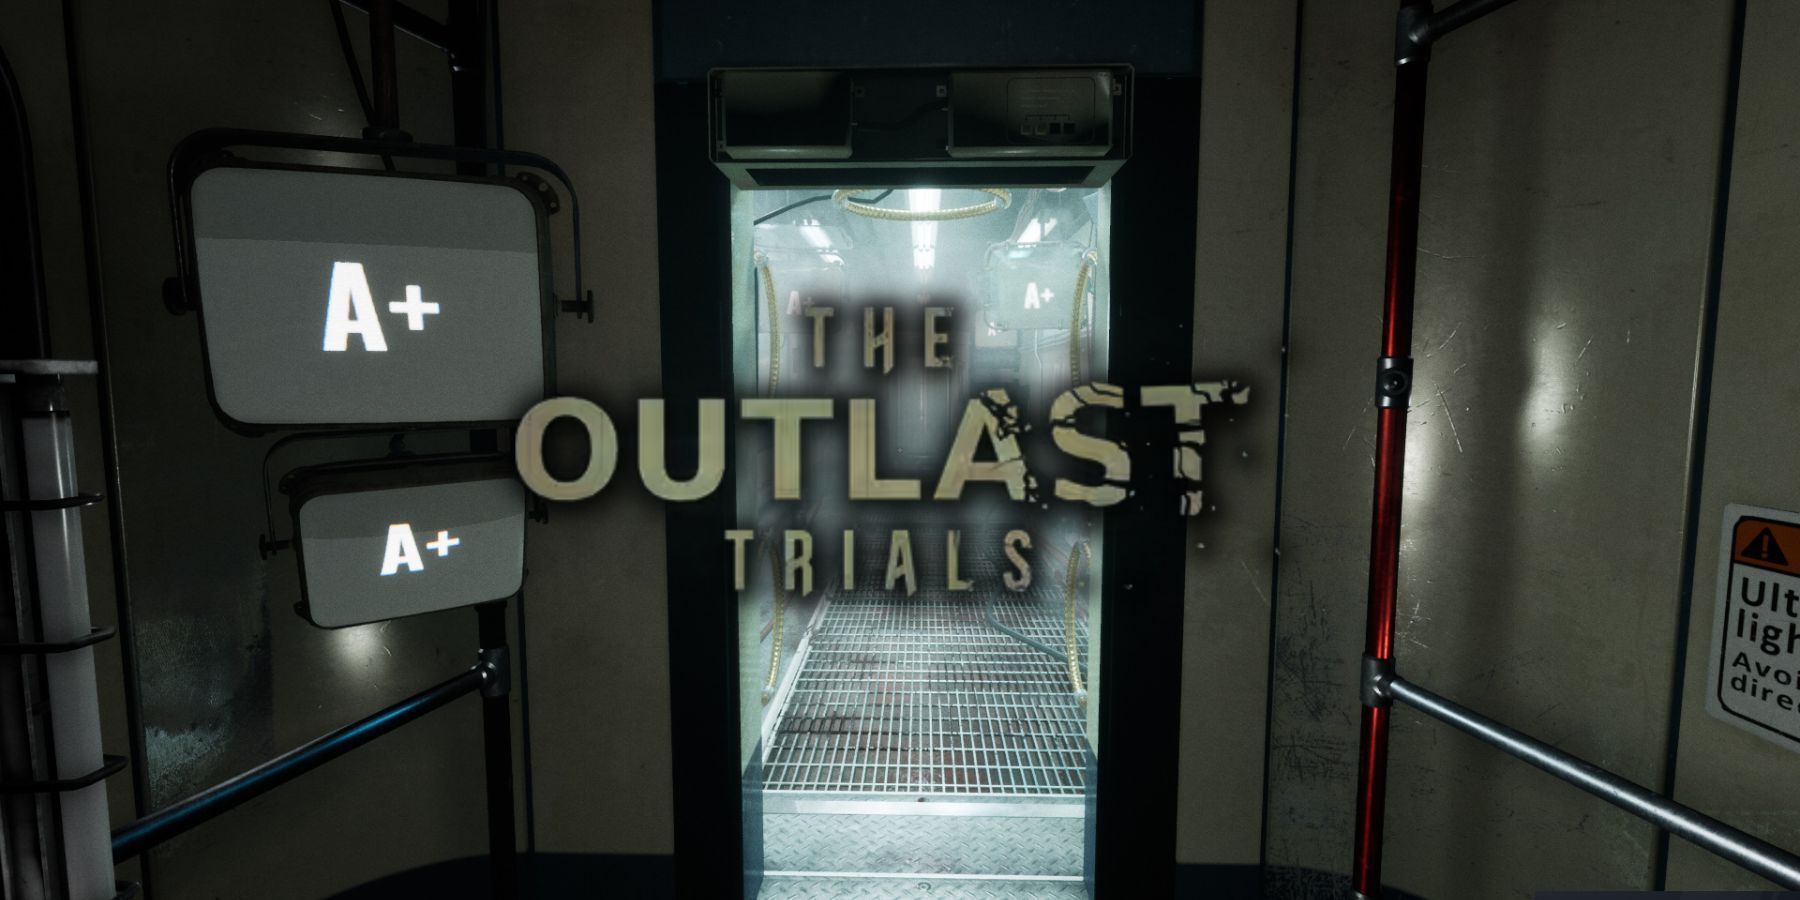 How to get Amps in The Outlast Trials